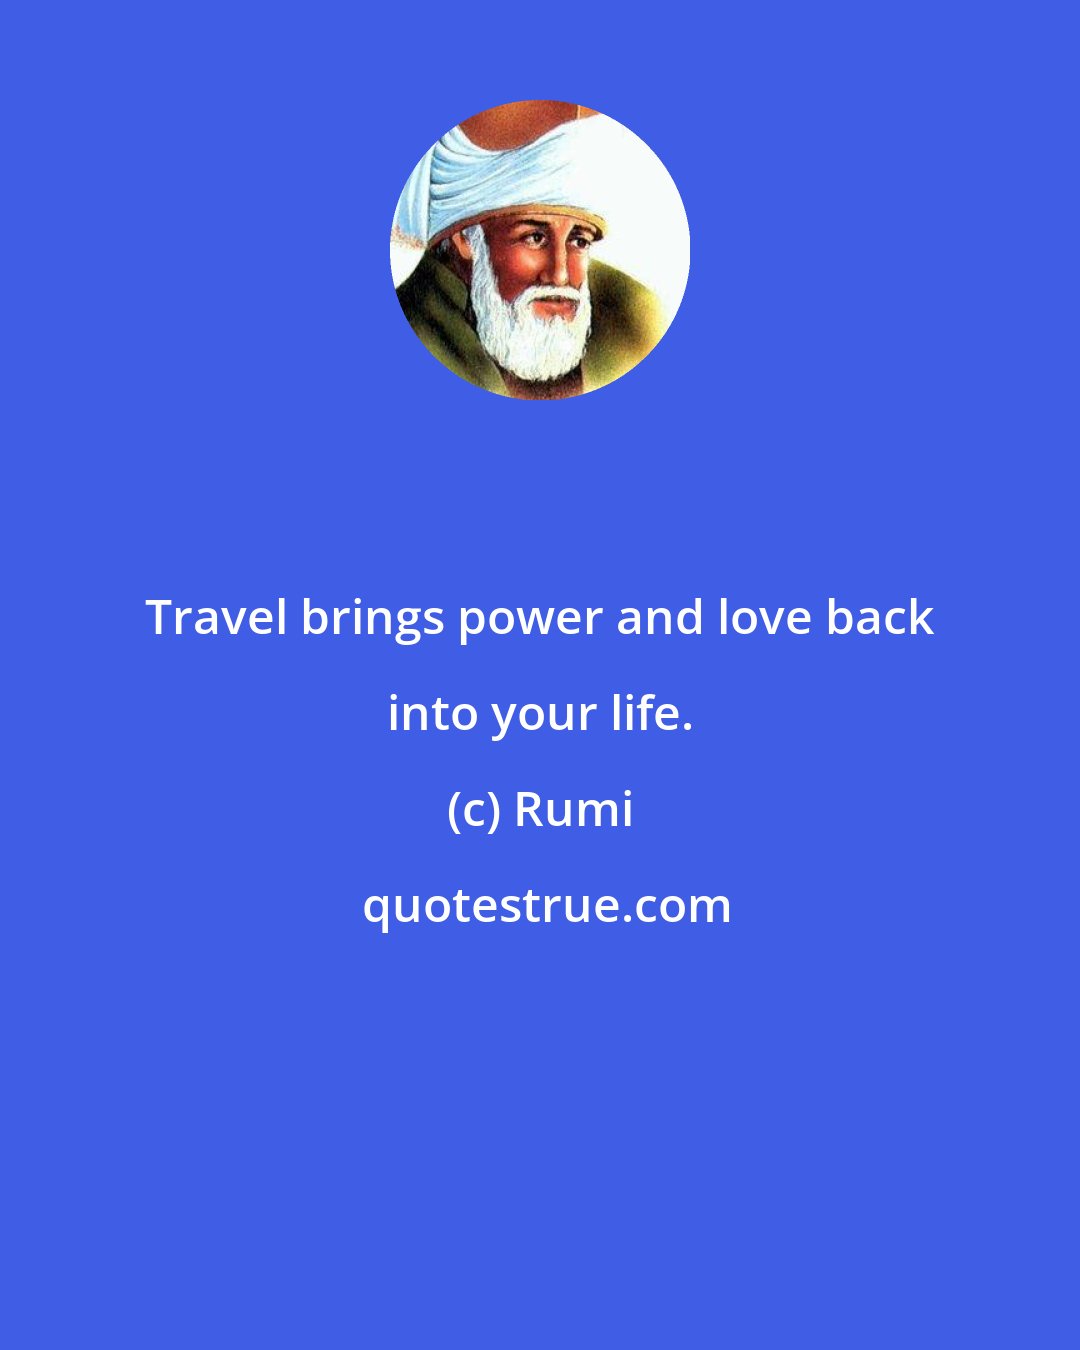 Rumi: Travel brings power and love back into your life.